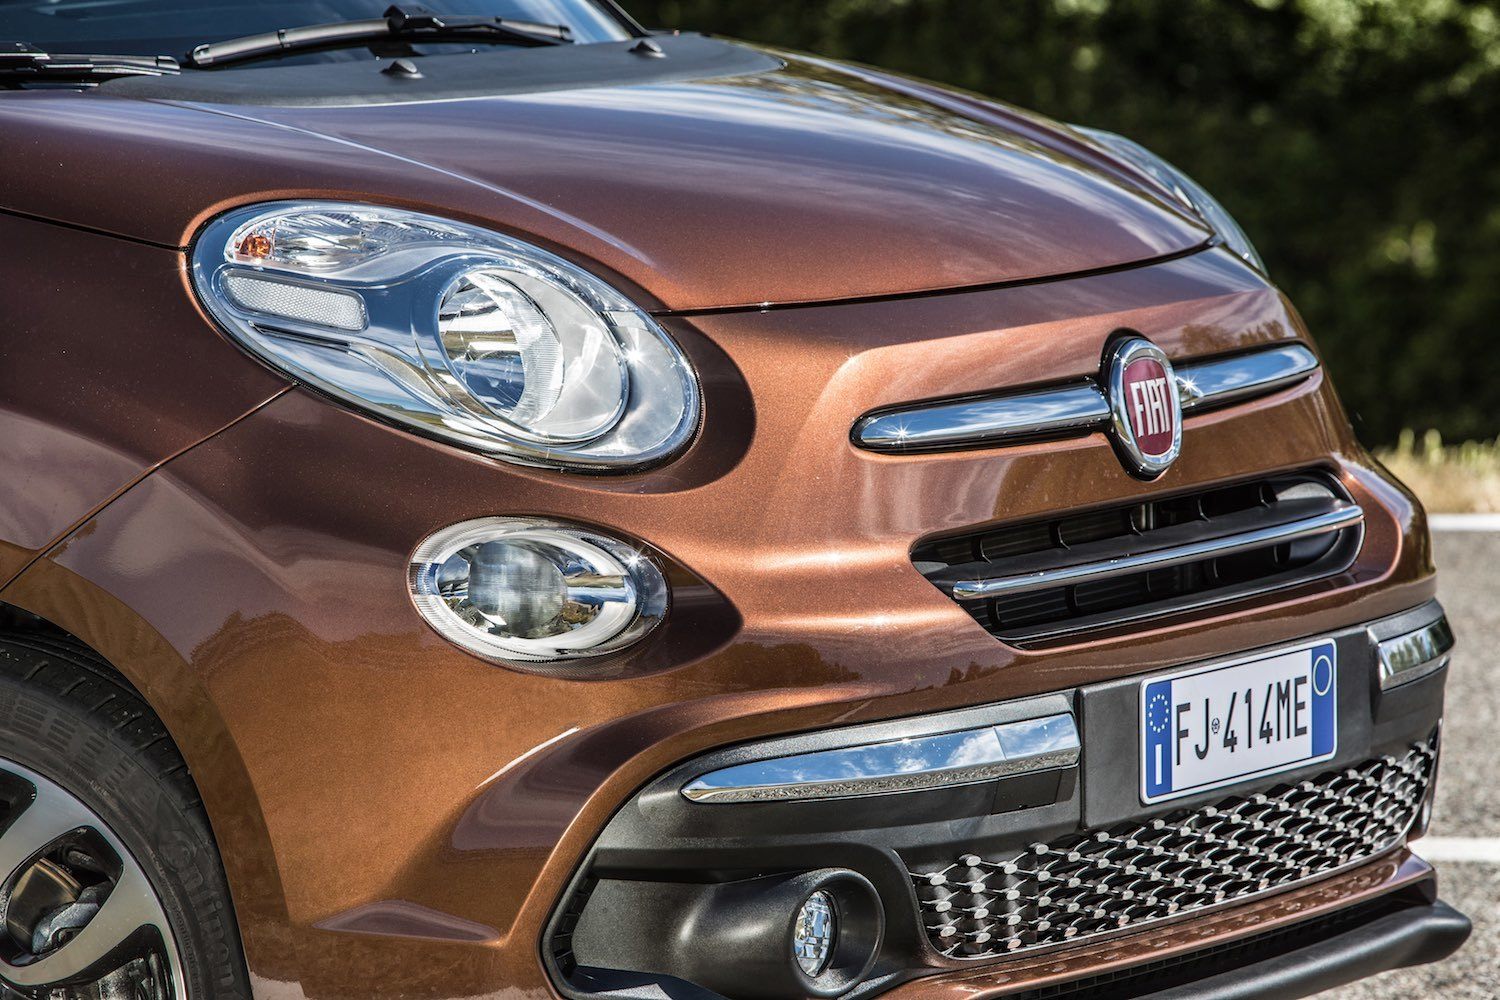 Tim Barnes-Clay reviews the New Fiat 500L from the first drive in Italy 19